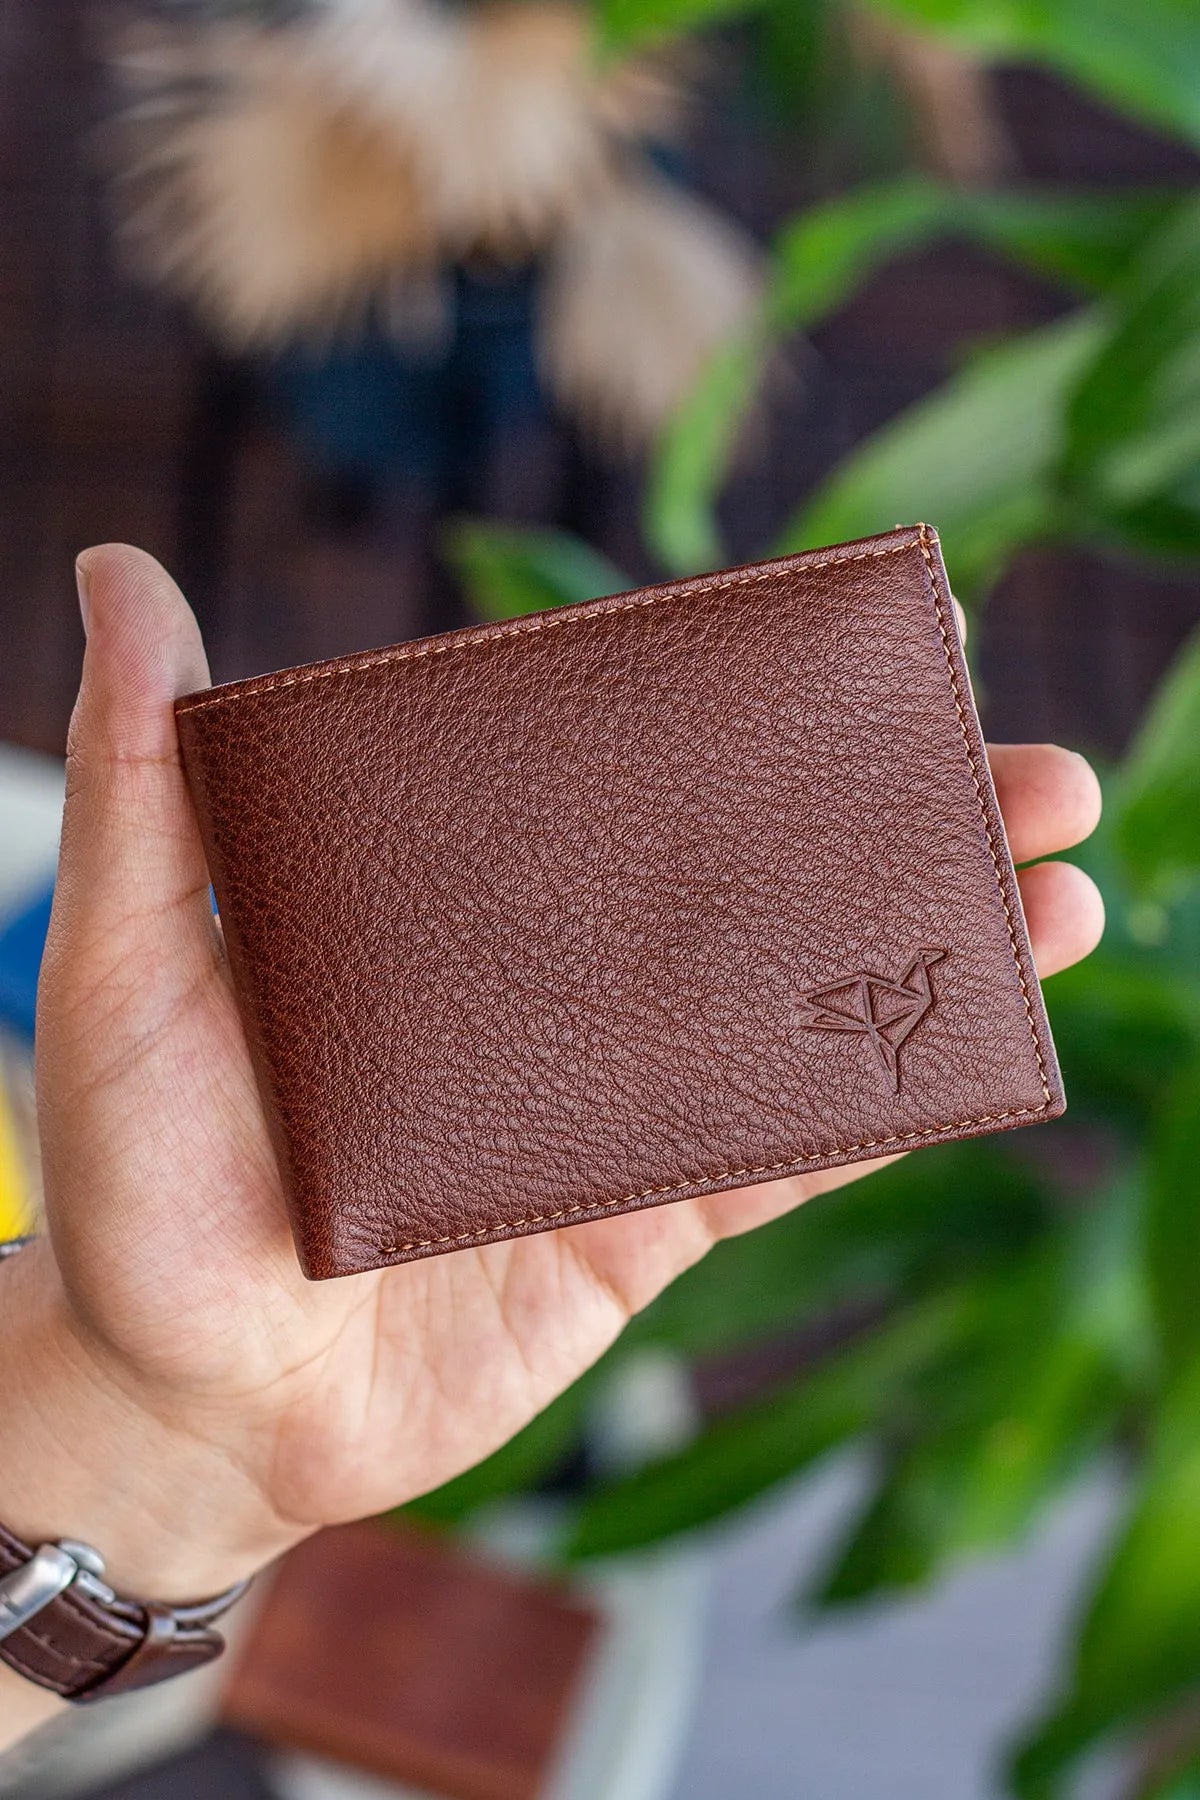 Jackson Genuine Leather RFID Blocking Naturel Tan Wallet with Coin Compartment for Men: A Stylish and Secure Choice